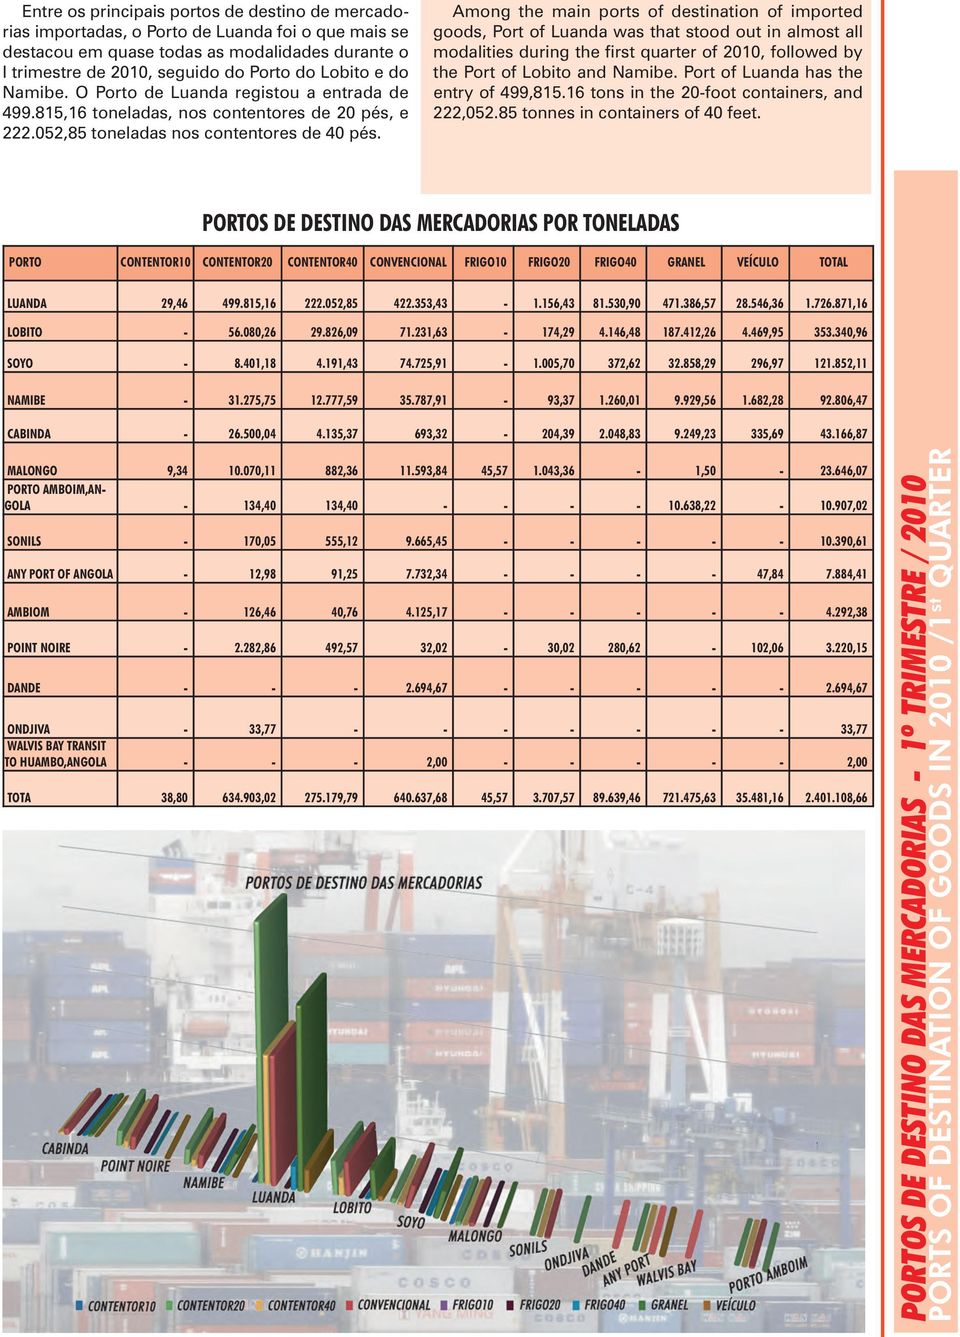 Among the main ports of destination of imported goods, Port of Luanda was that stood out in almost all modalities during the first quarter of 2010, followed by the Port of Lobito and Namibe.